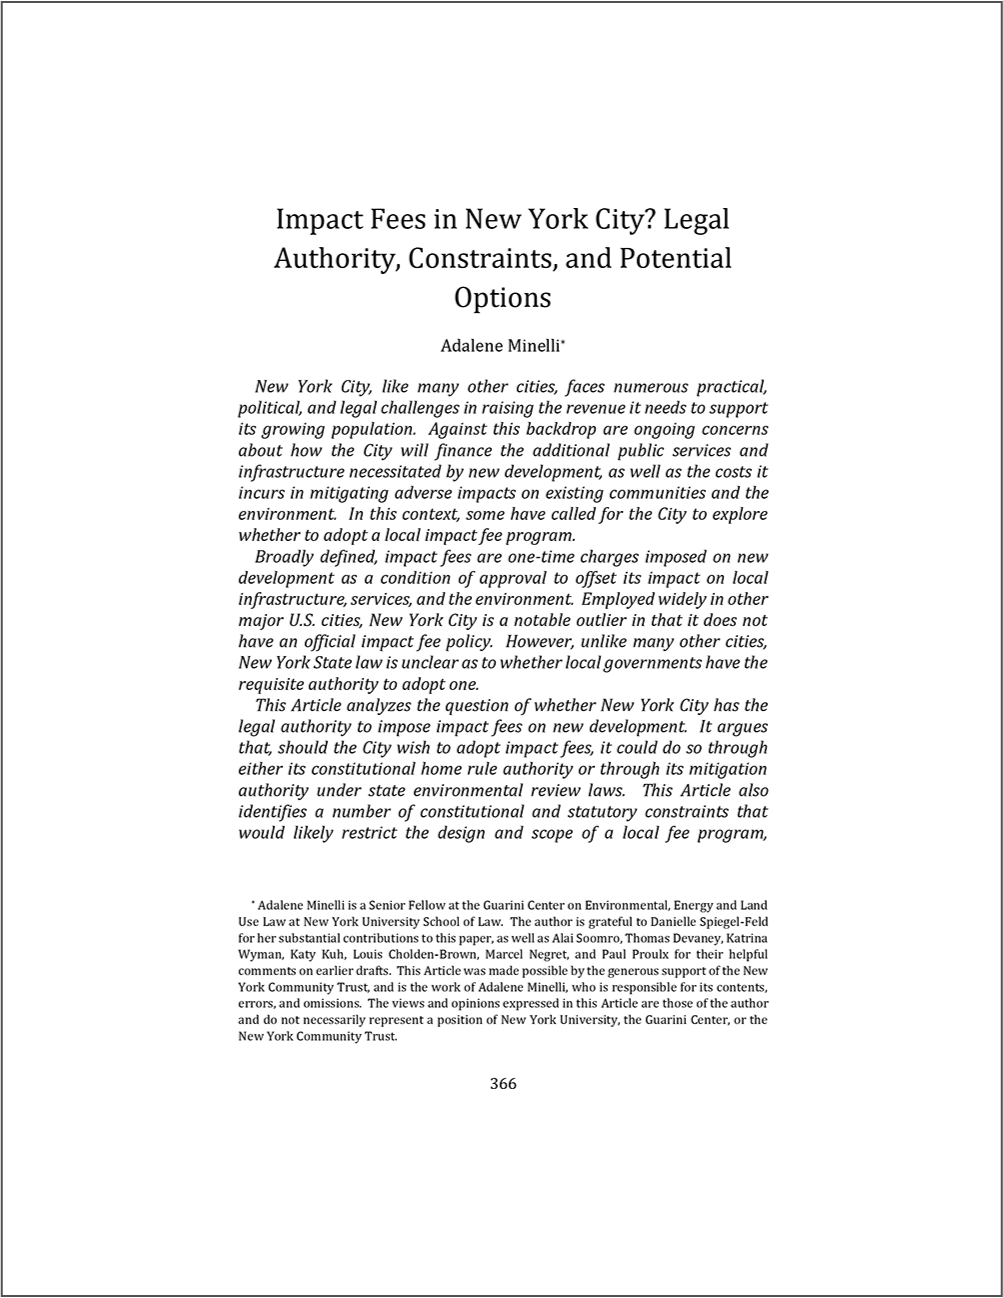 Impact Fees in New York City? Legal Authority, Constraints, and Potential Options